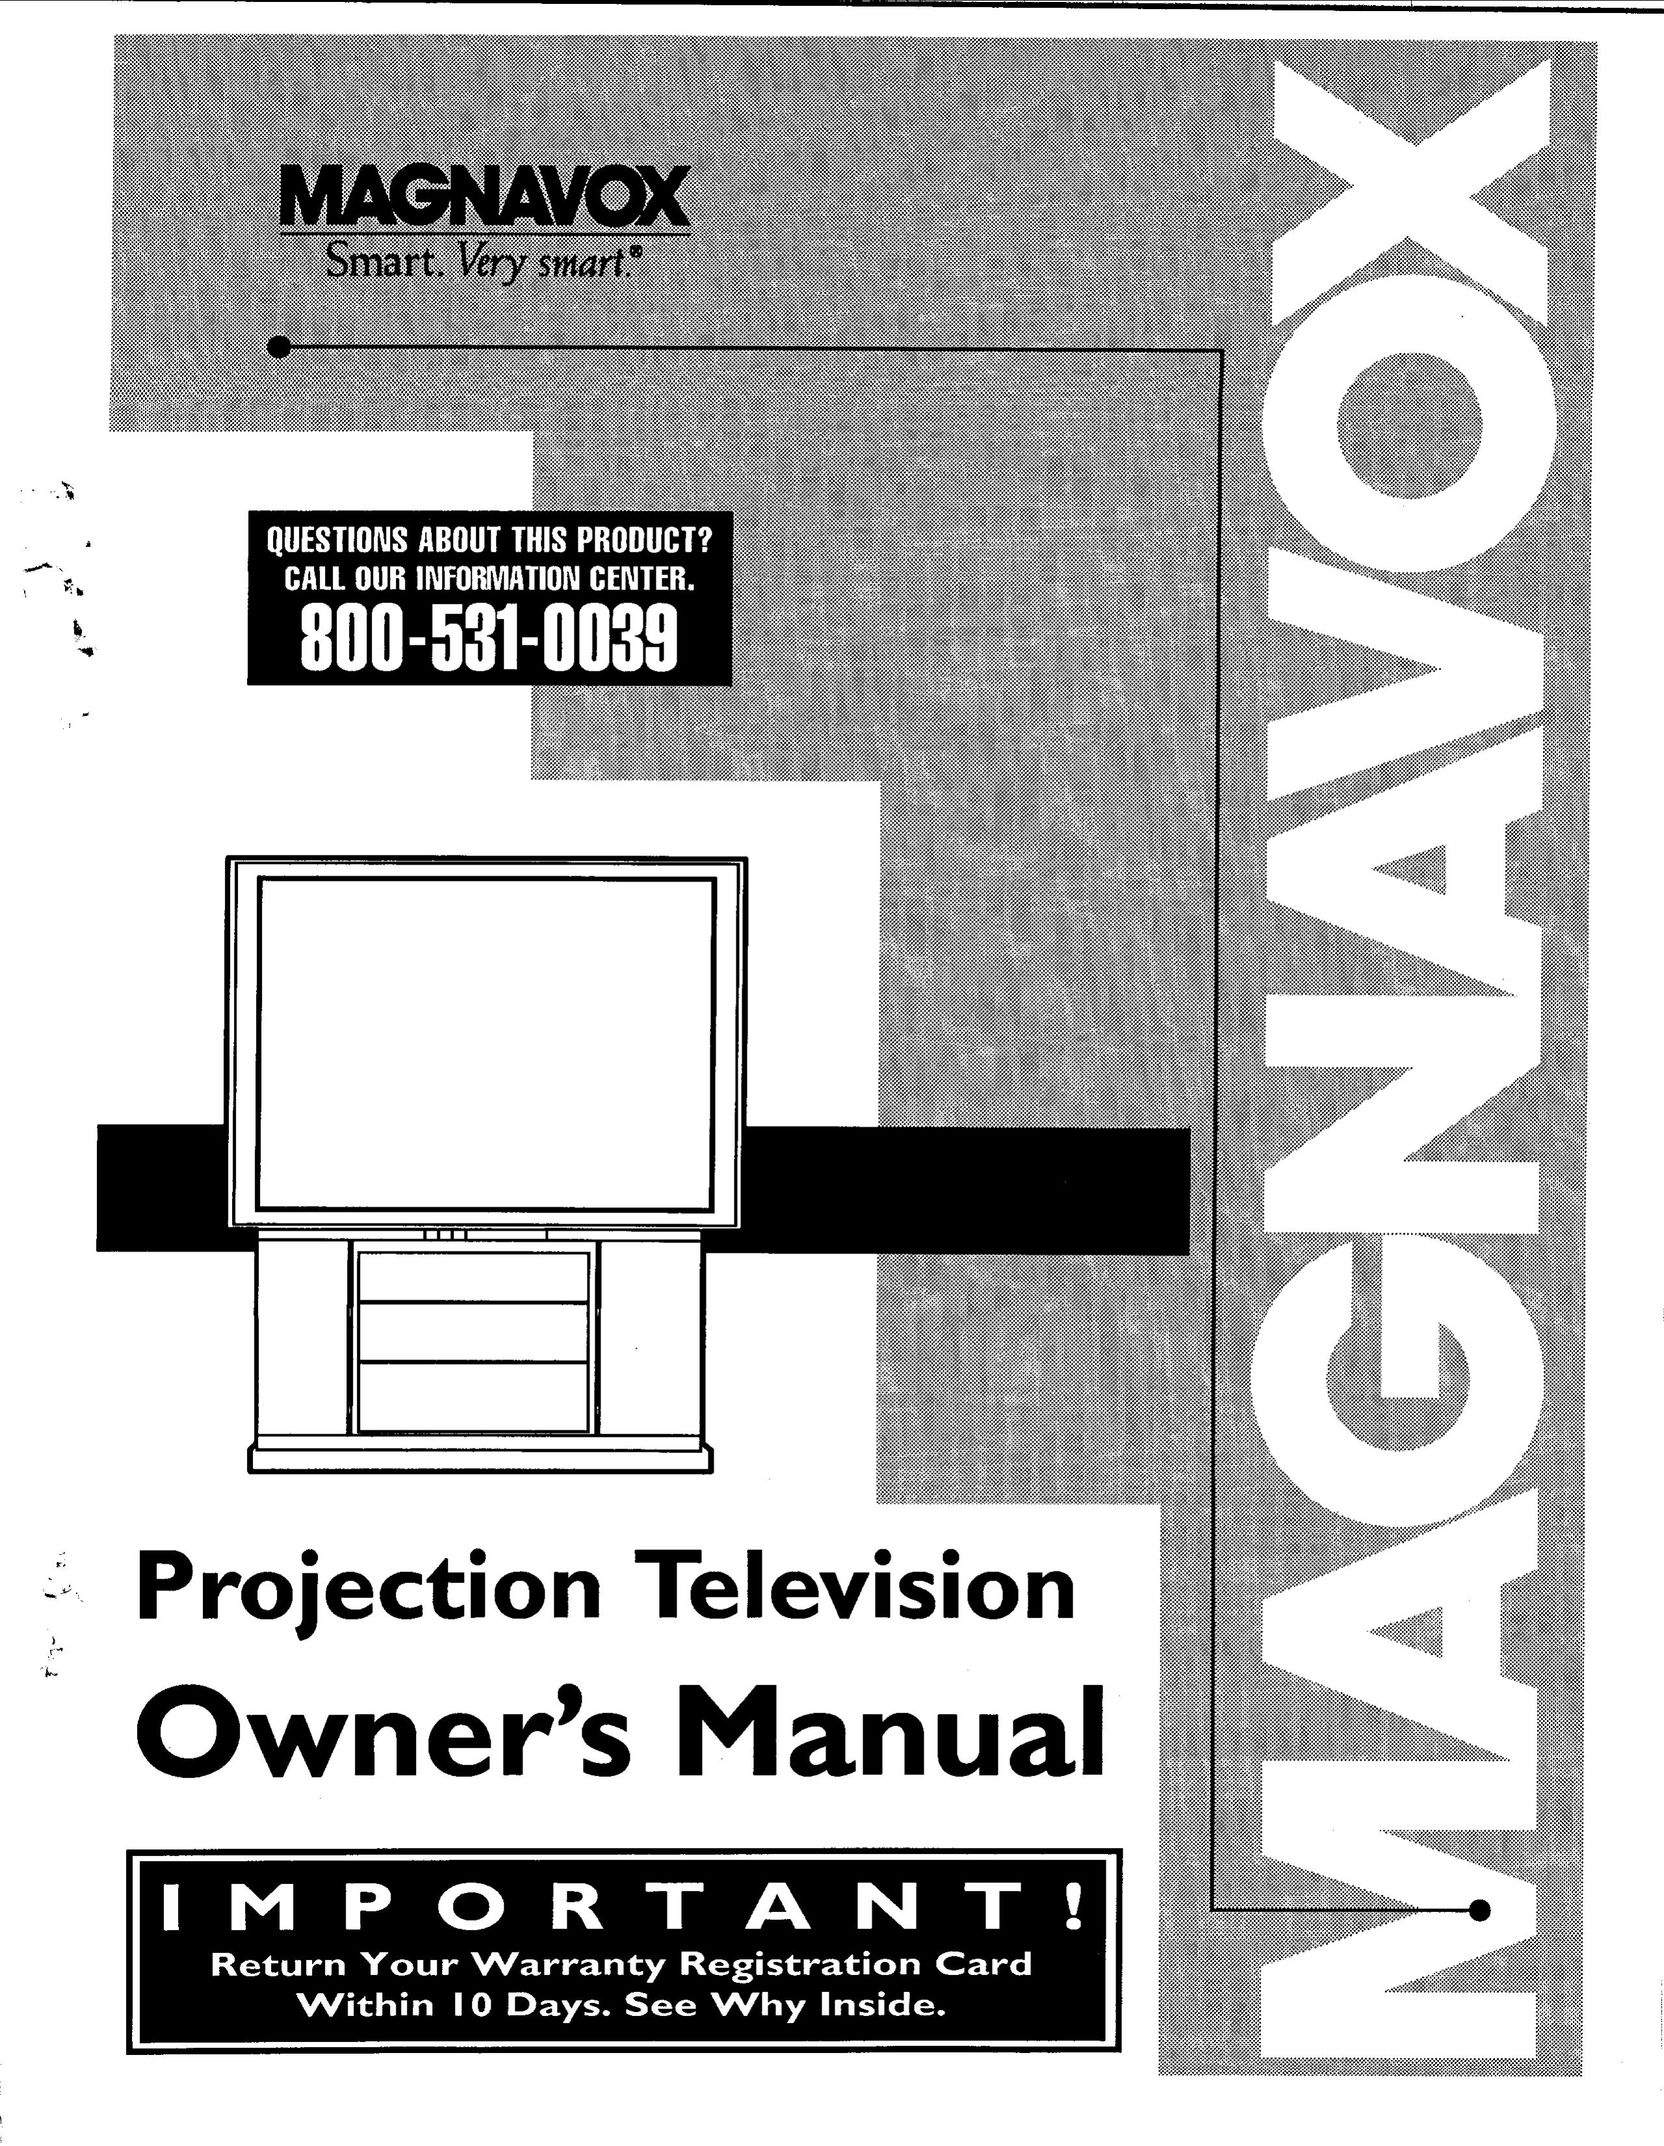 Magnavox 6P5451C Projection Television User Manual